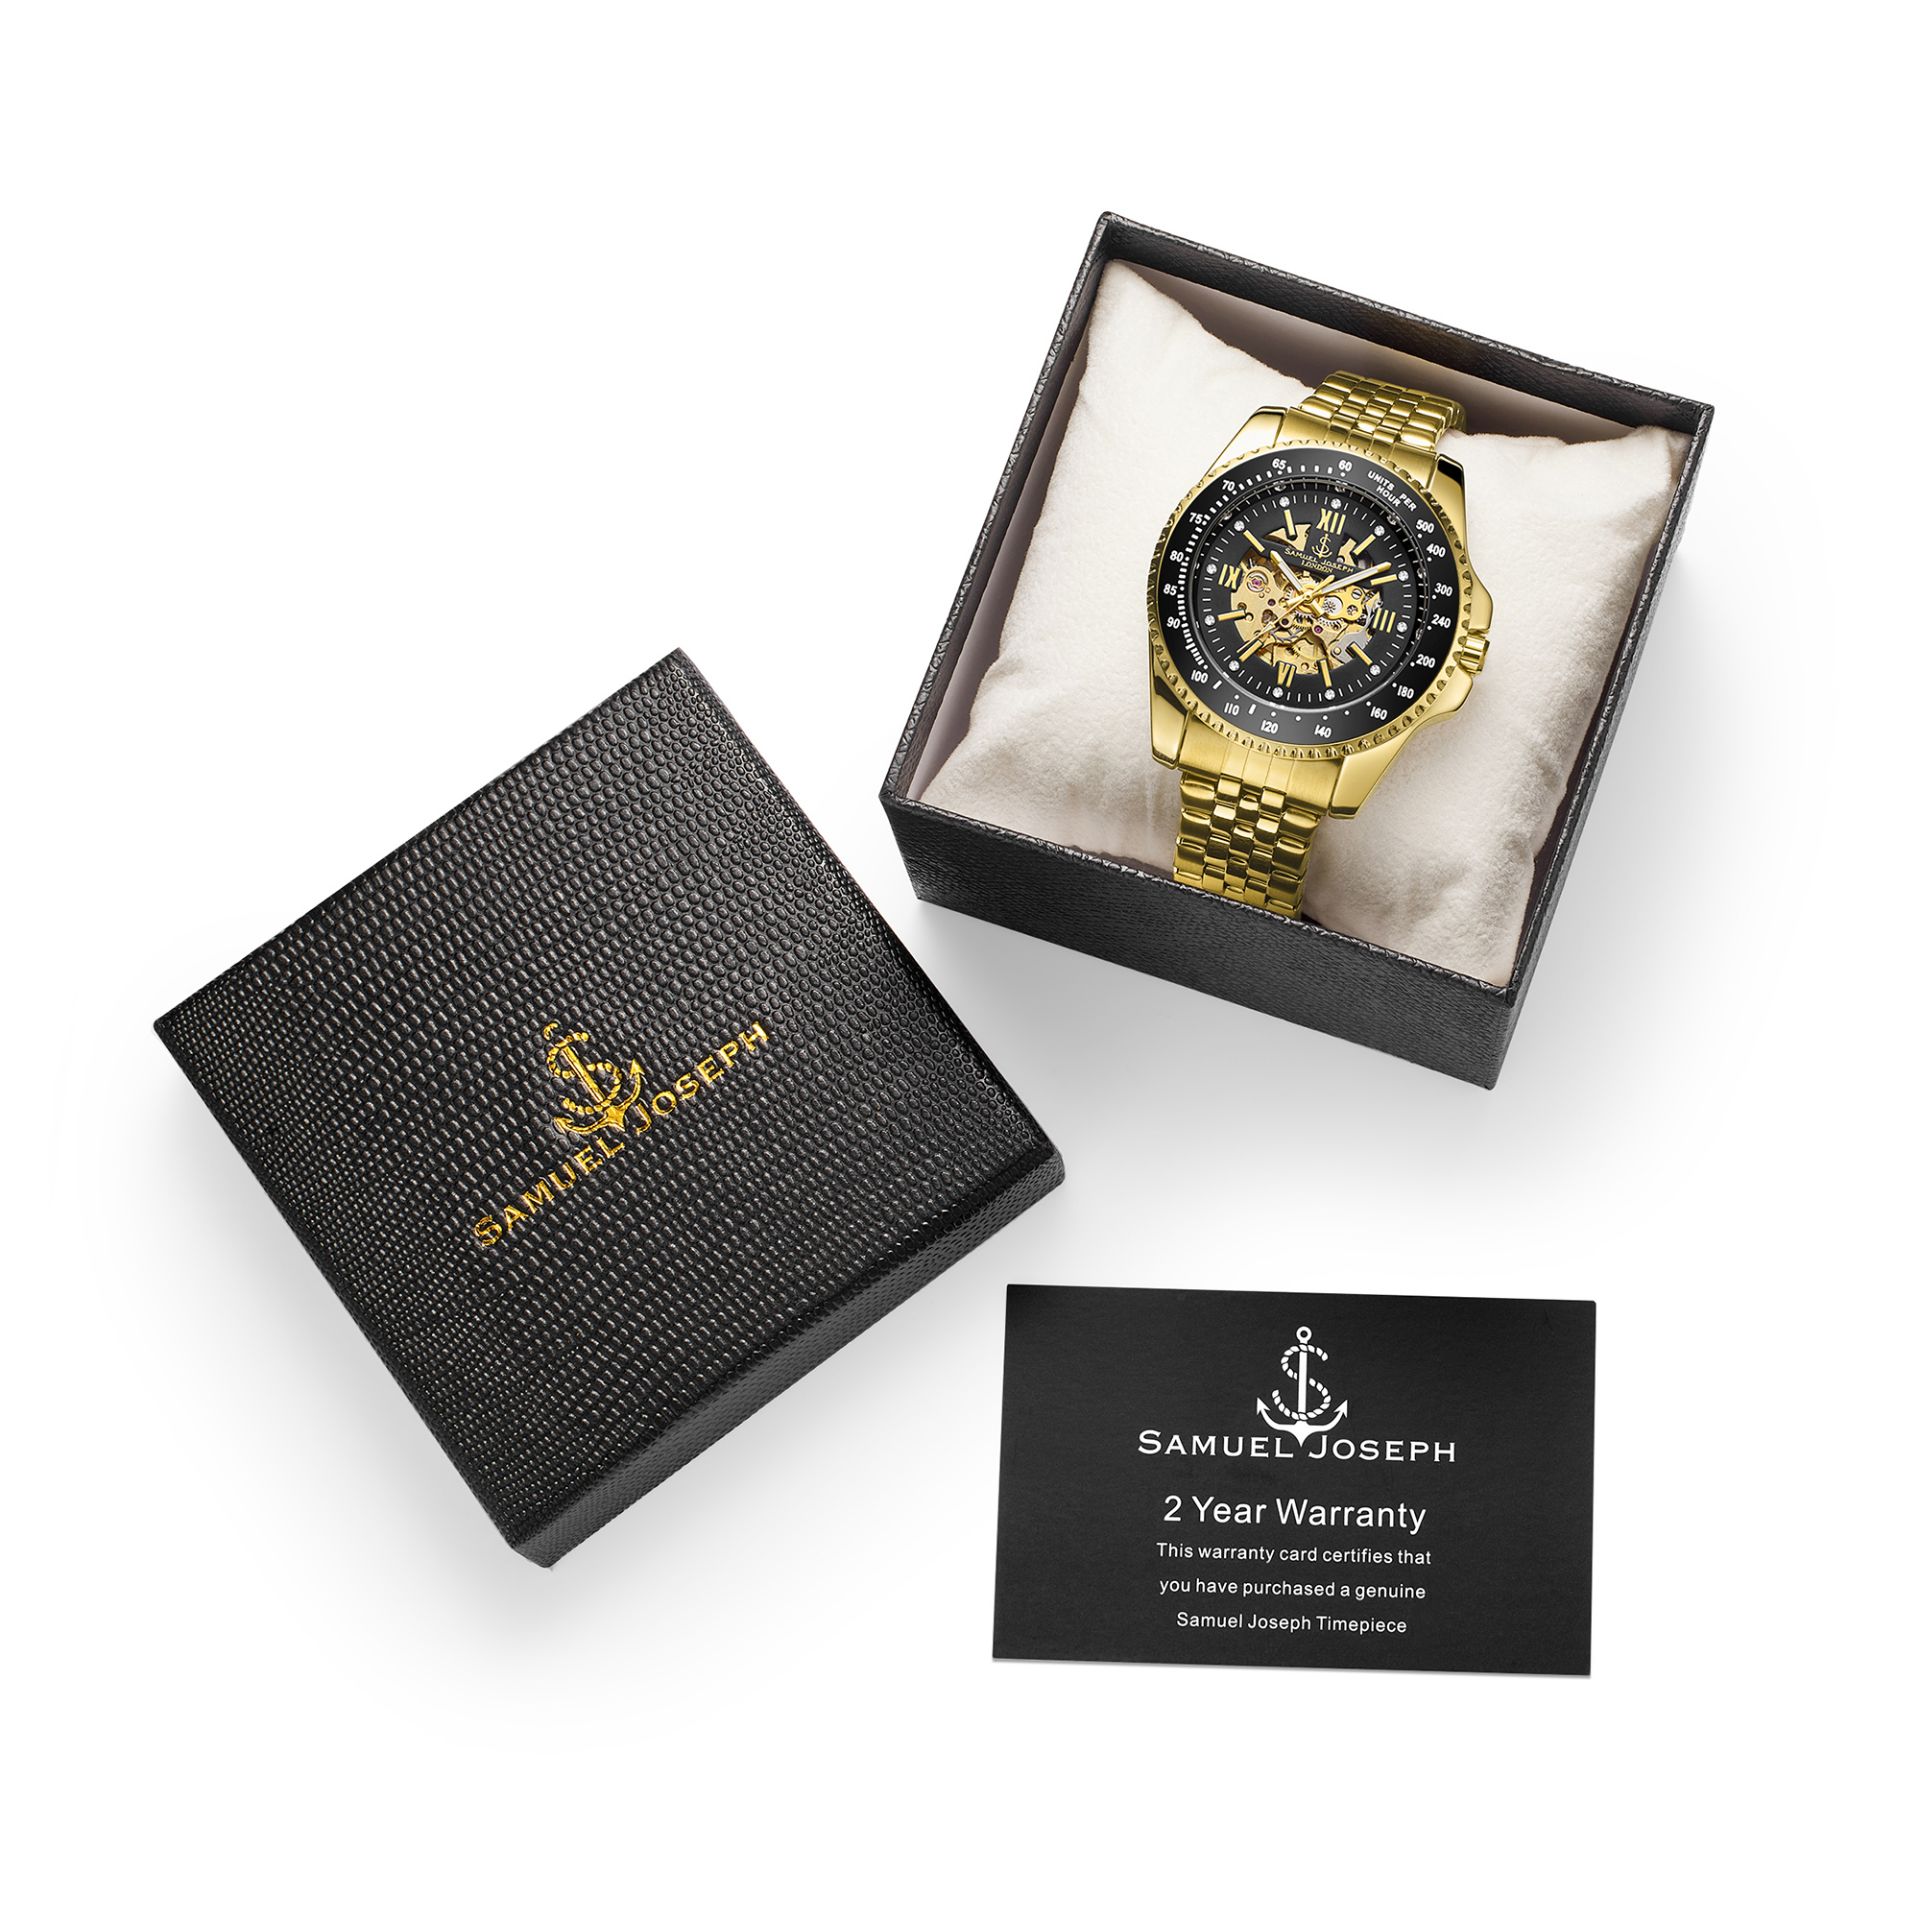 Samuel Joseph Limited Edition Skeleton Mechanism Gold Watch - Free Delivery & 2 Year Warranty - Image 5 of 5